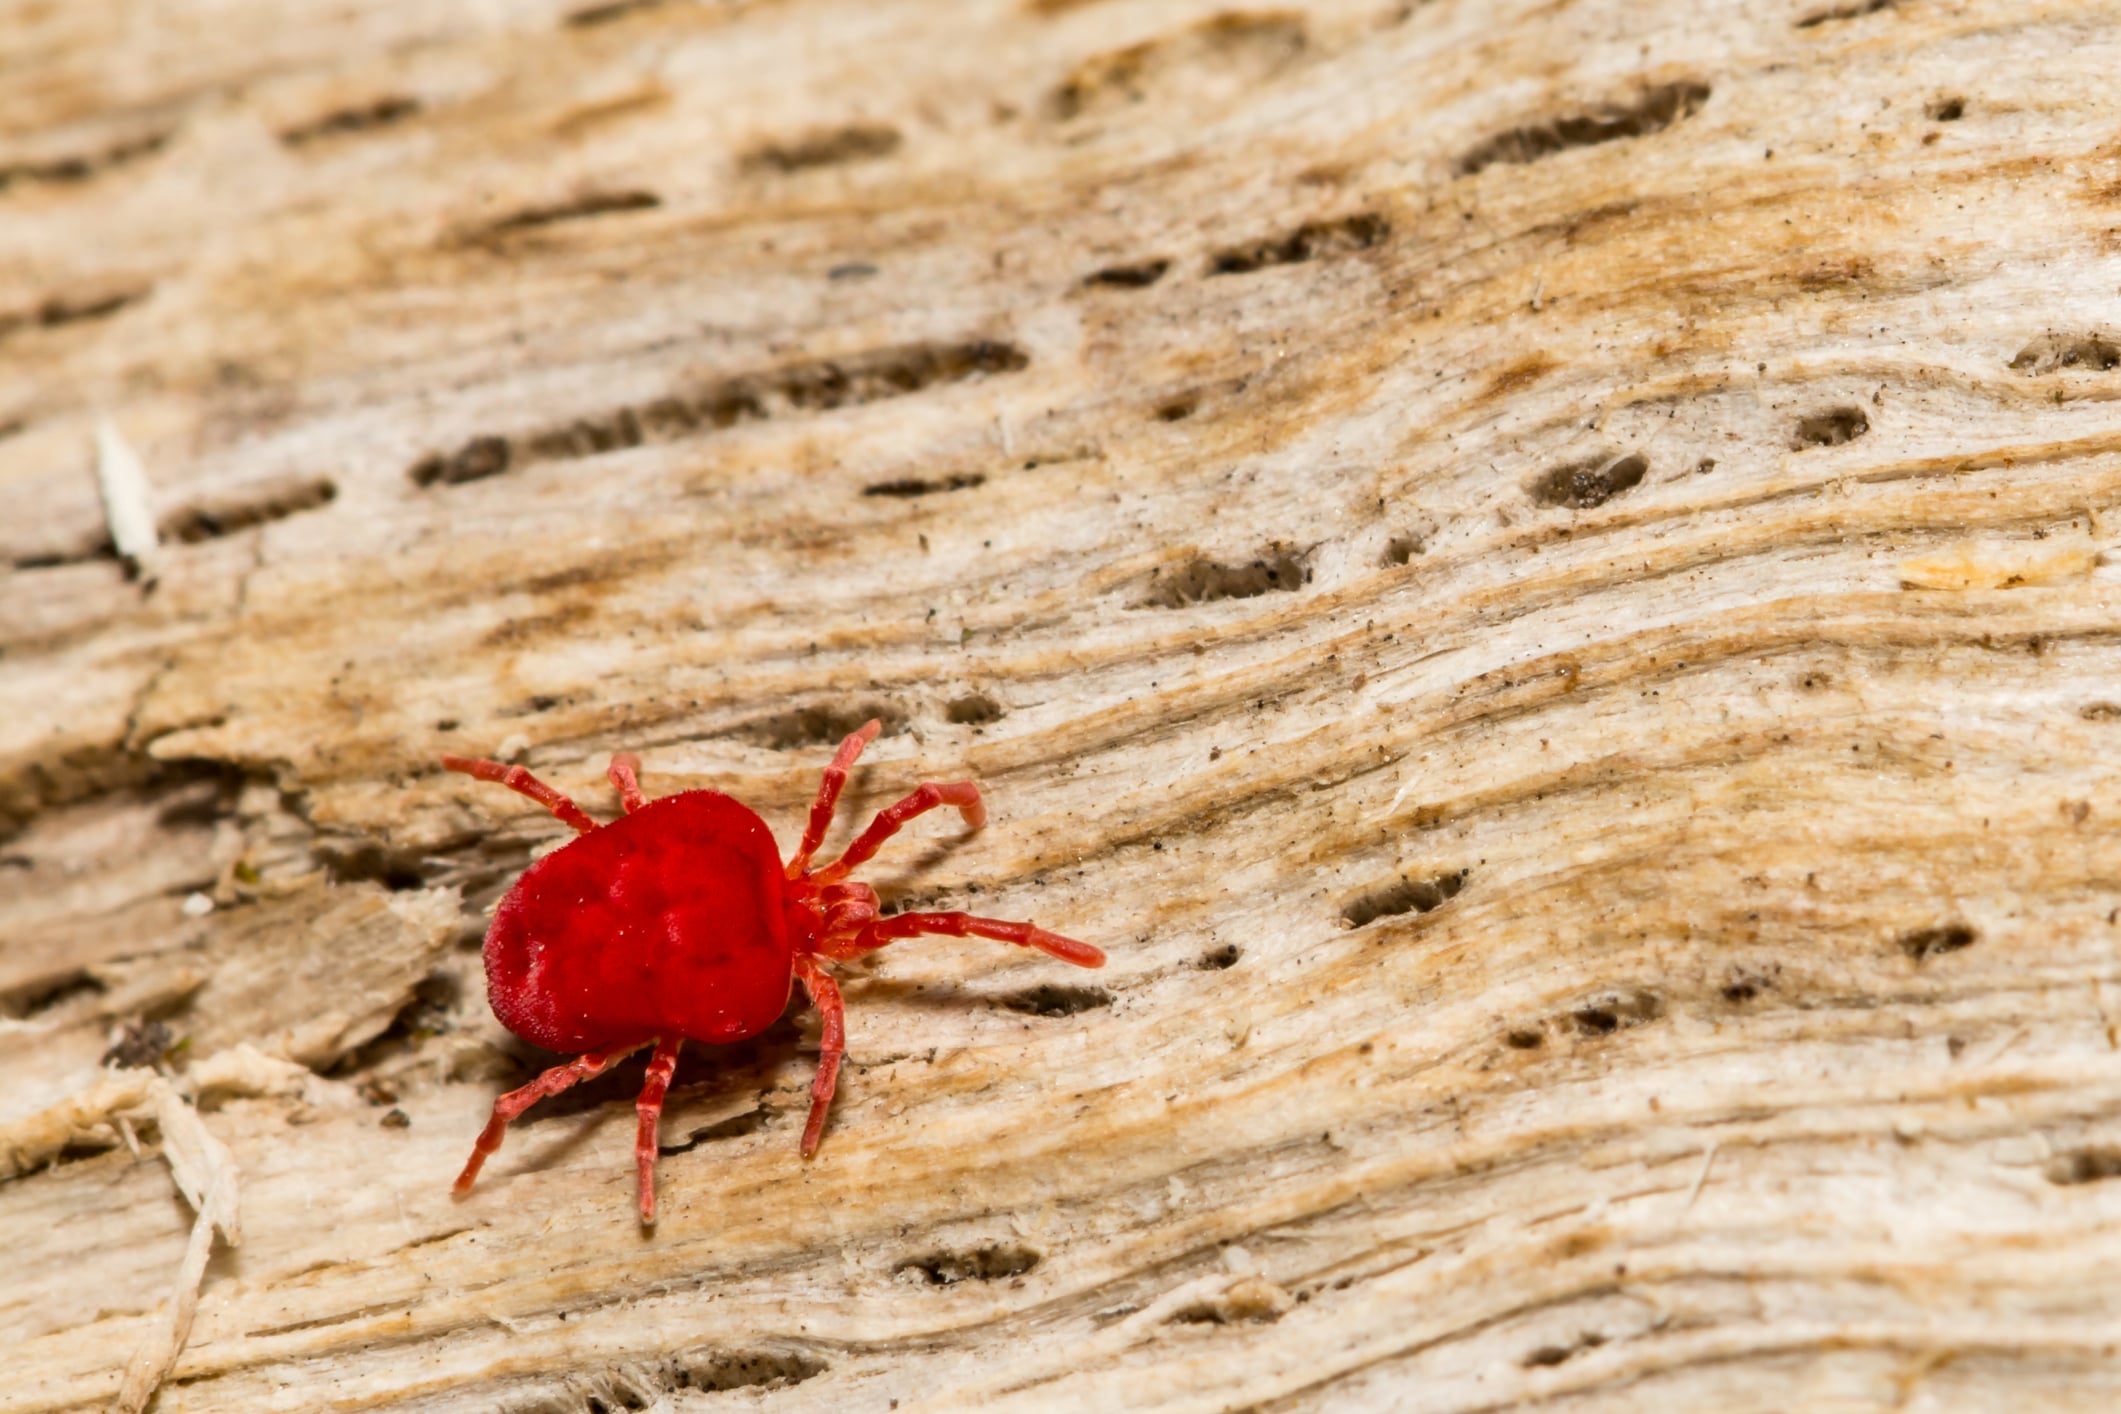 How To Avoid Chigger Mites